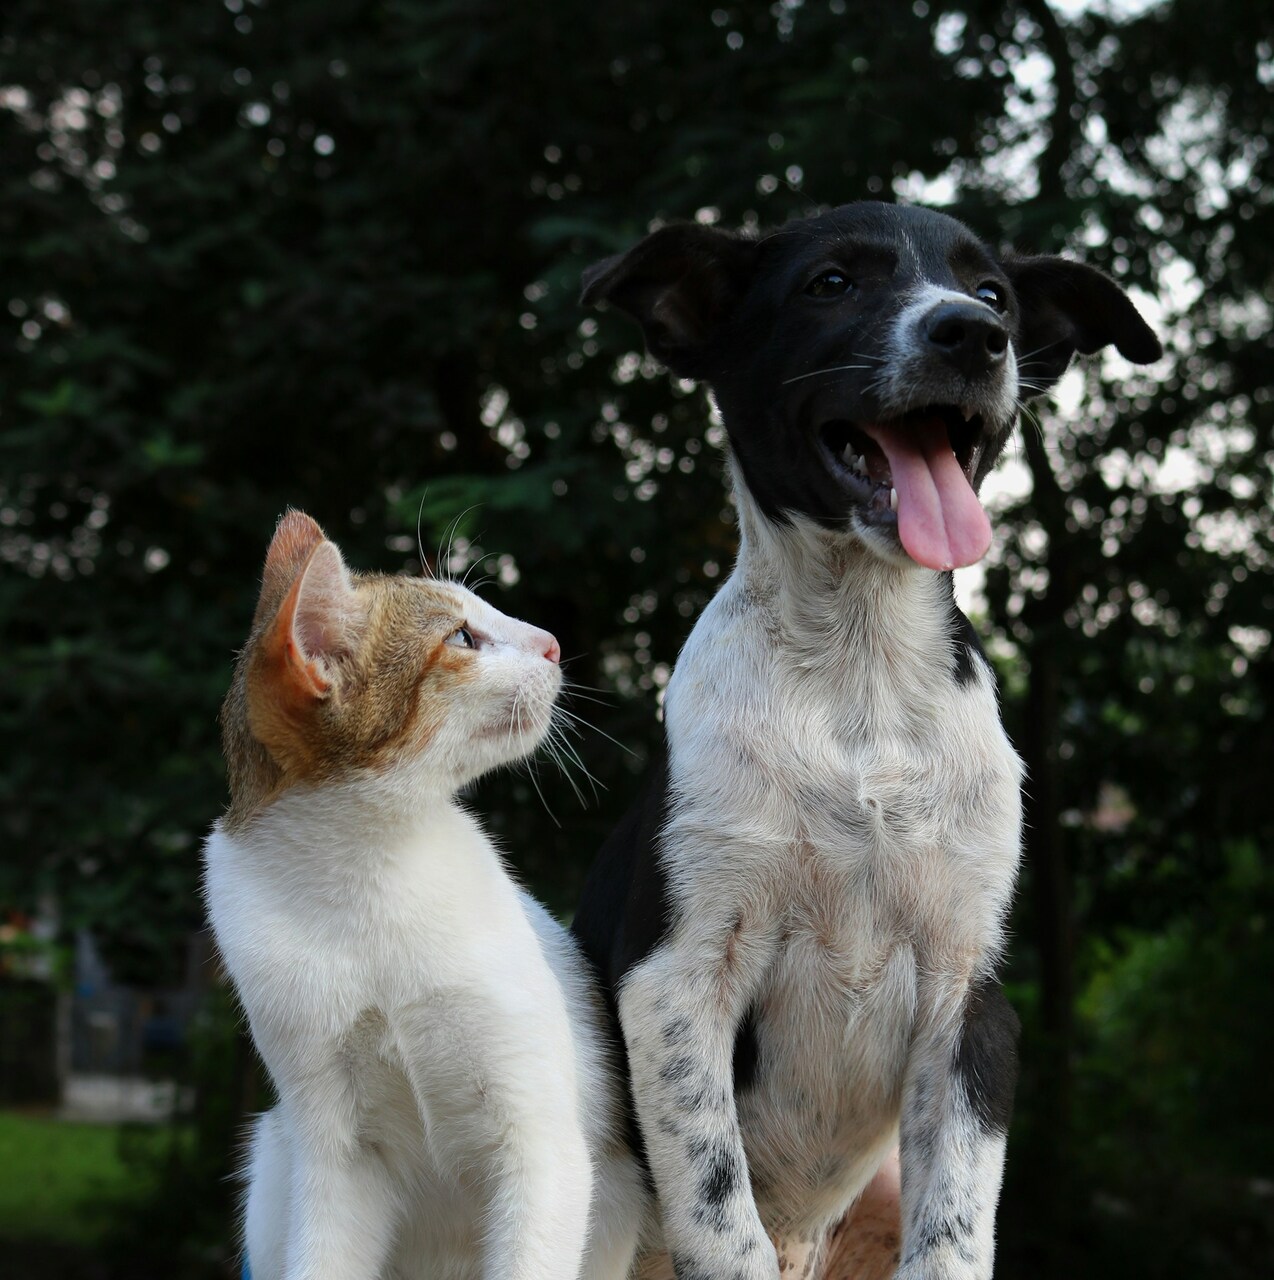 A dog and a cat sitting together outdoors